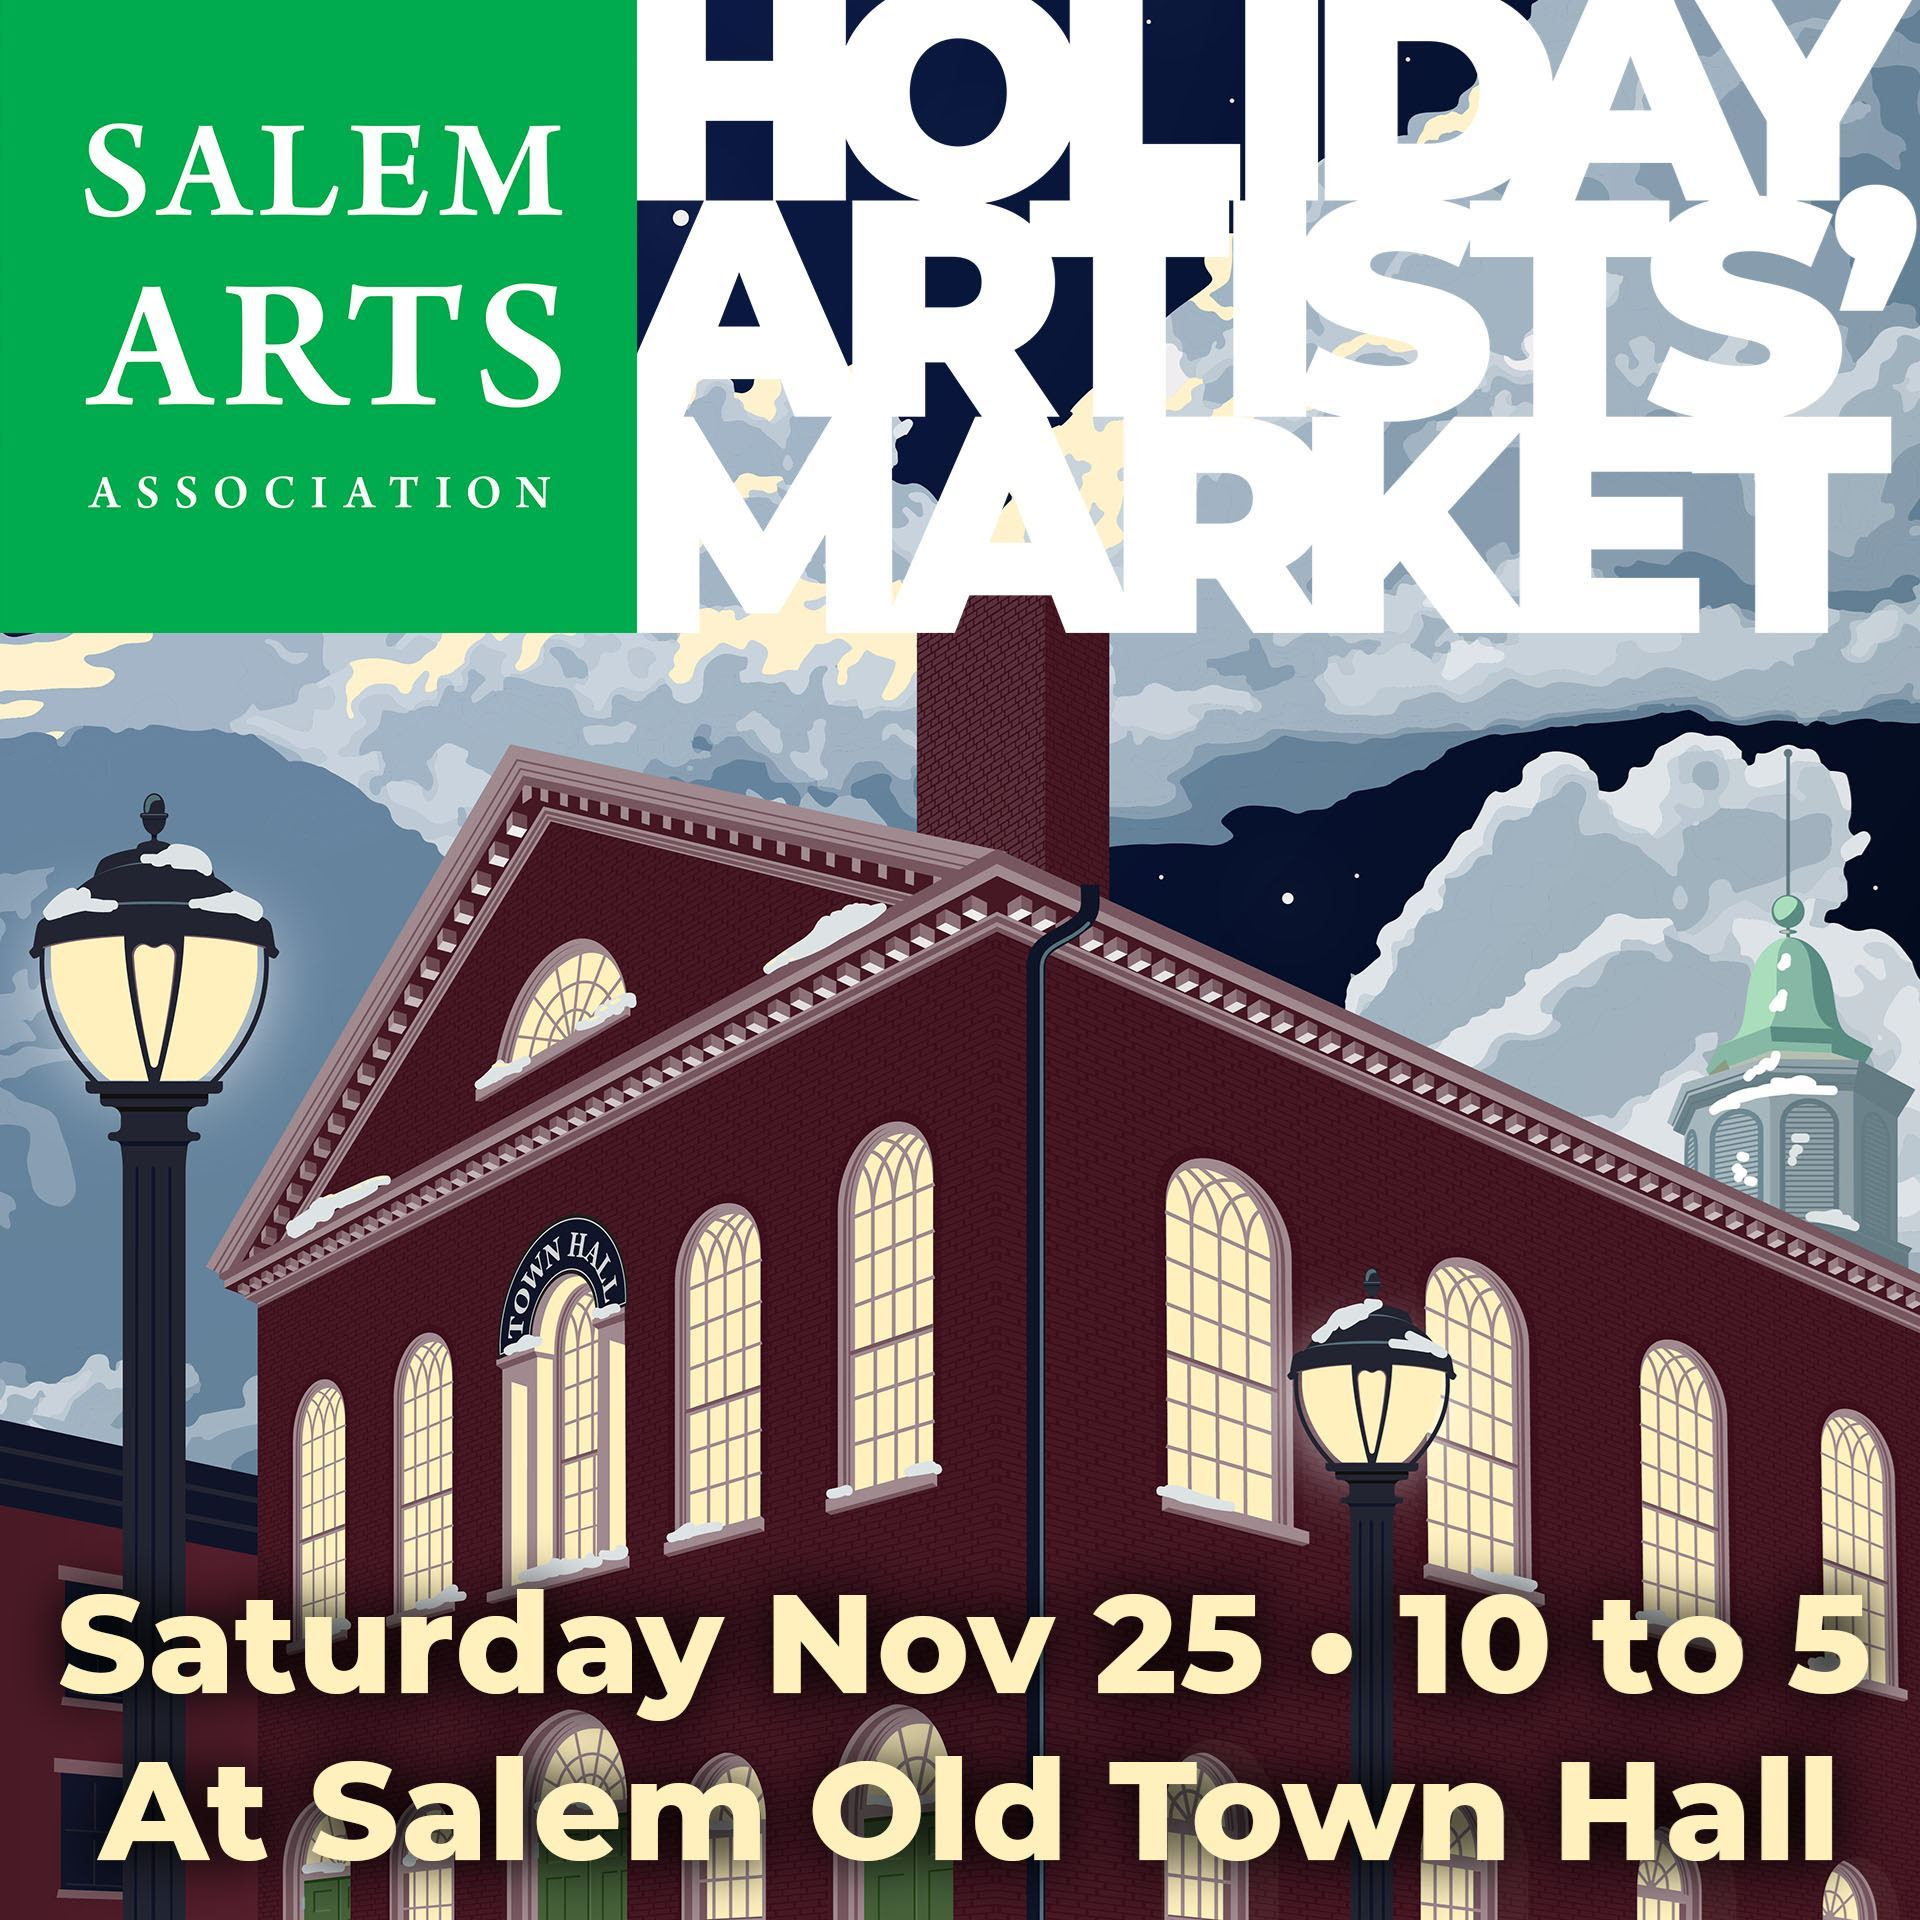 A poster for the holiday artists market in salem, massachusetts.